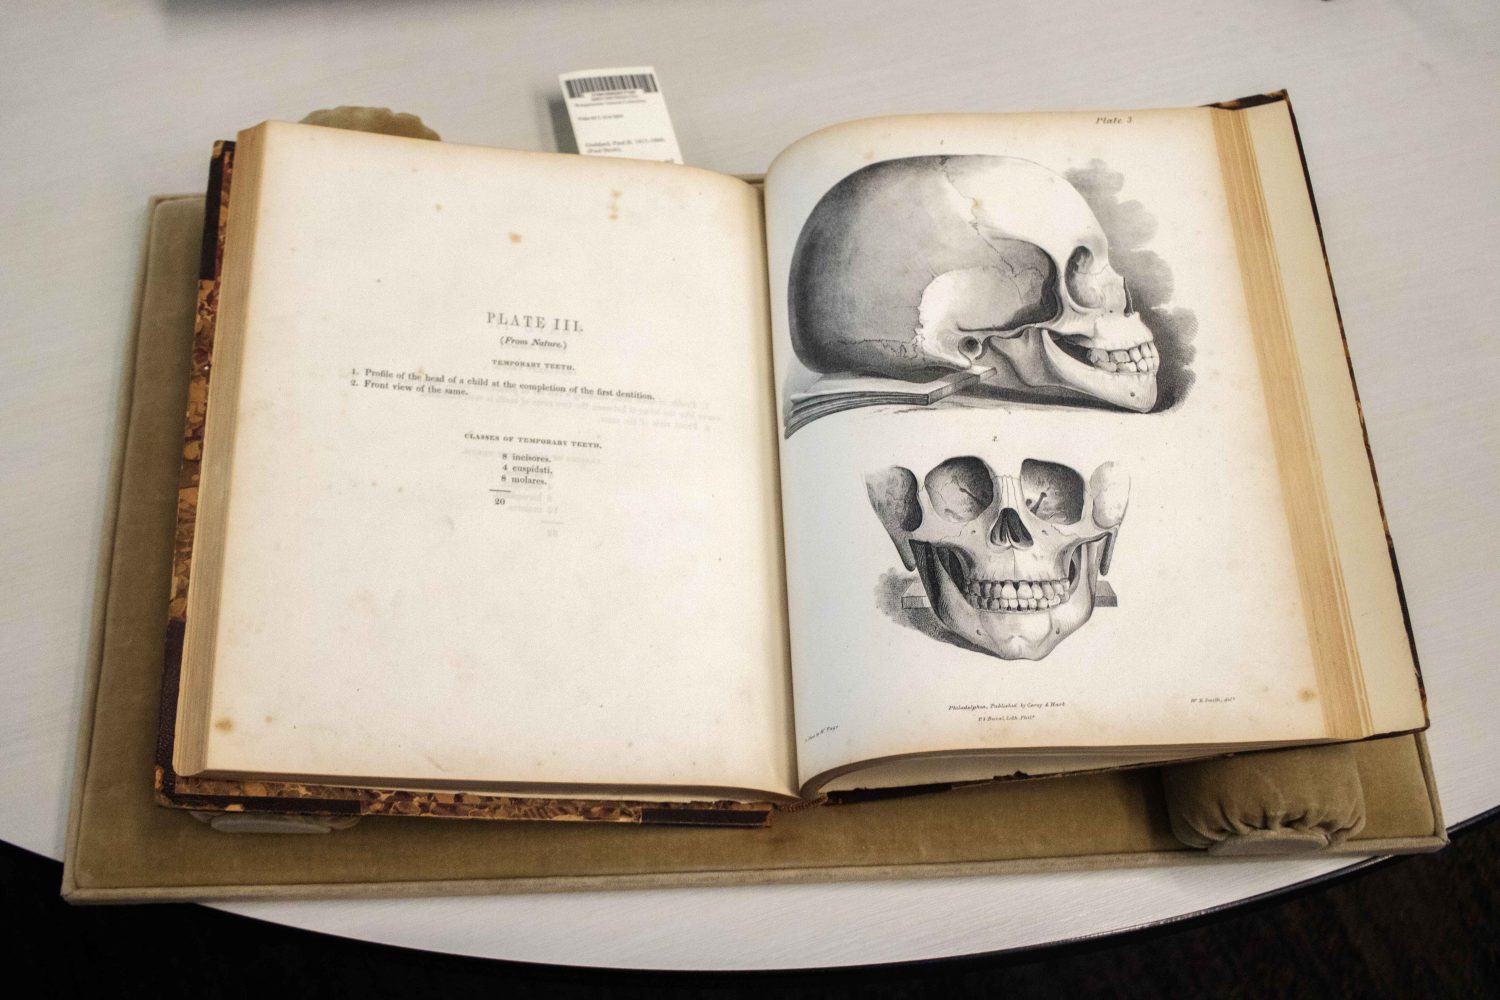 A rare book from the Wangensteen Historical Library shows drawings of the human skull. (Photo/Adria Carpenter)